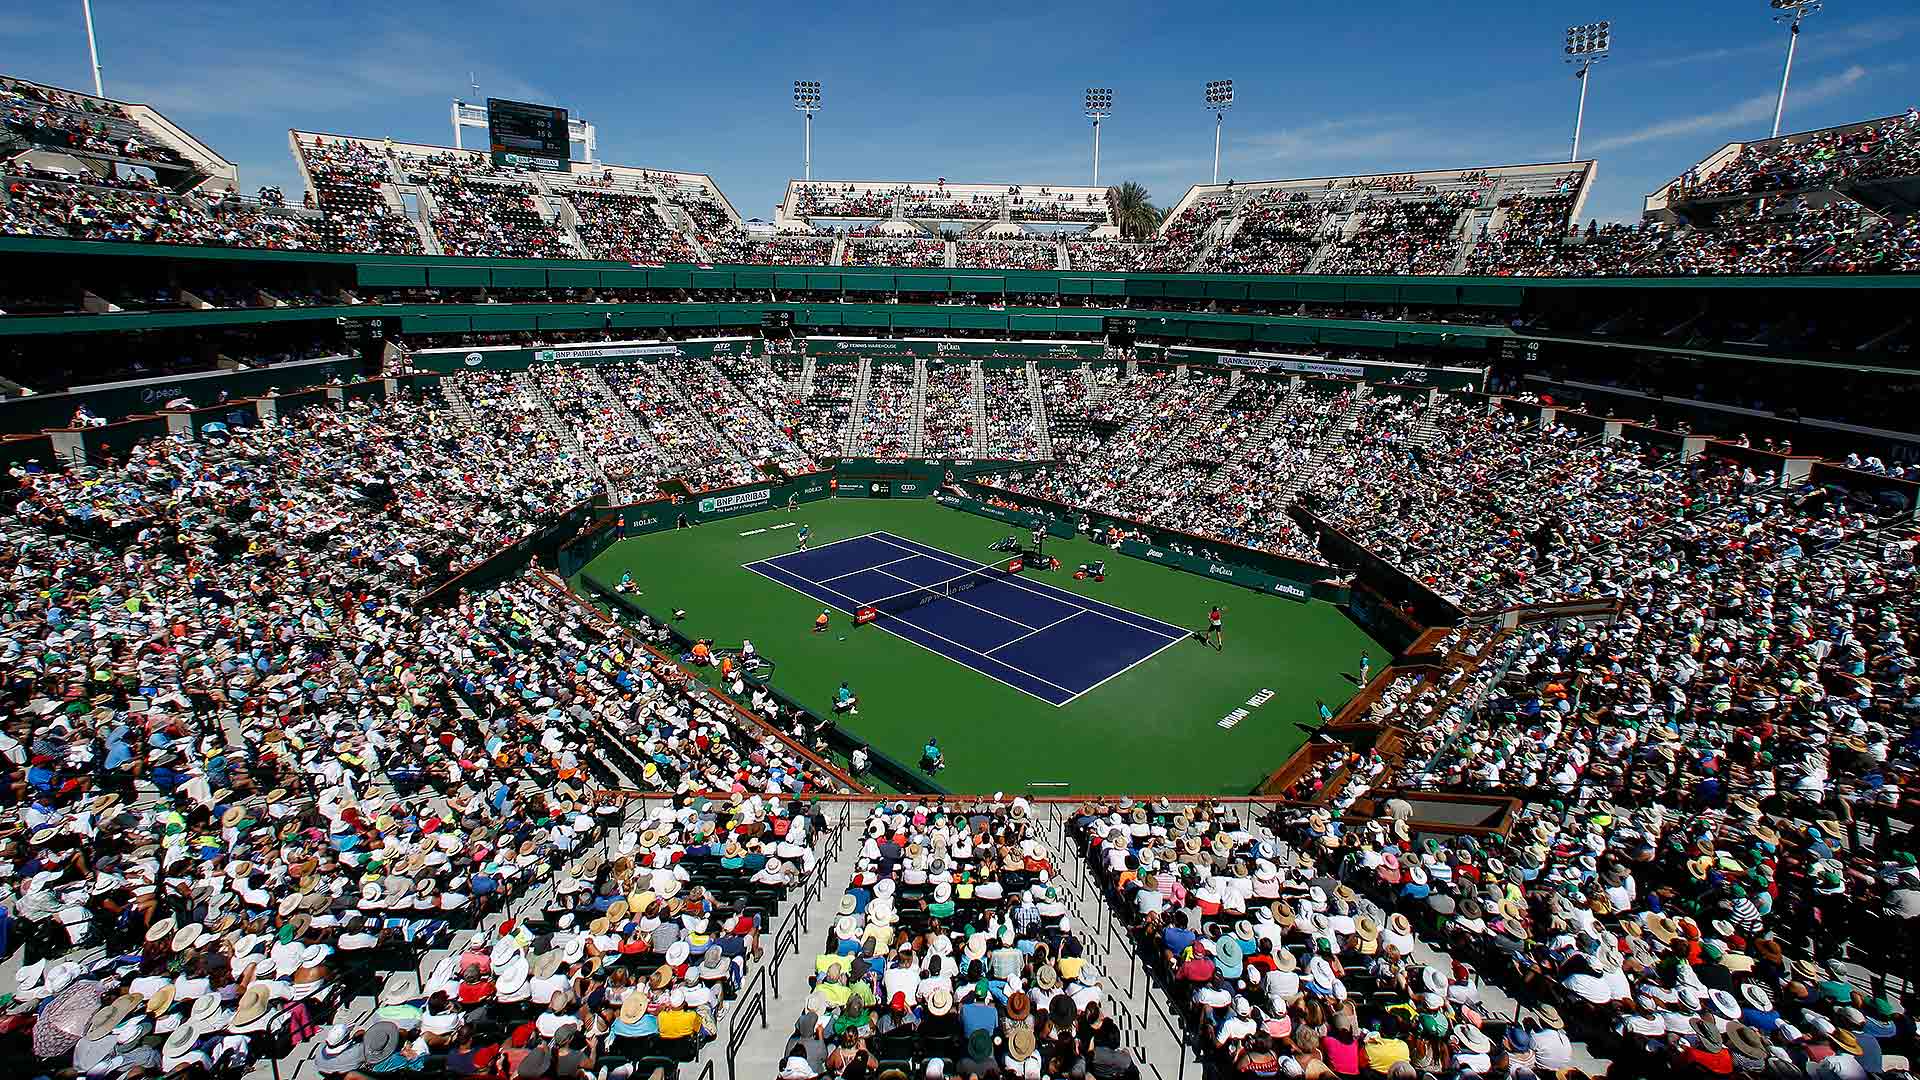 The 2023 BNP Paribas Open will be held from 8-19 March, with Taylor Fritz as reigning champion.